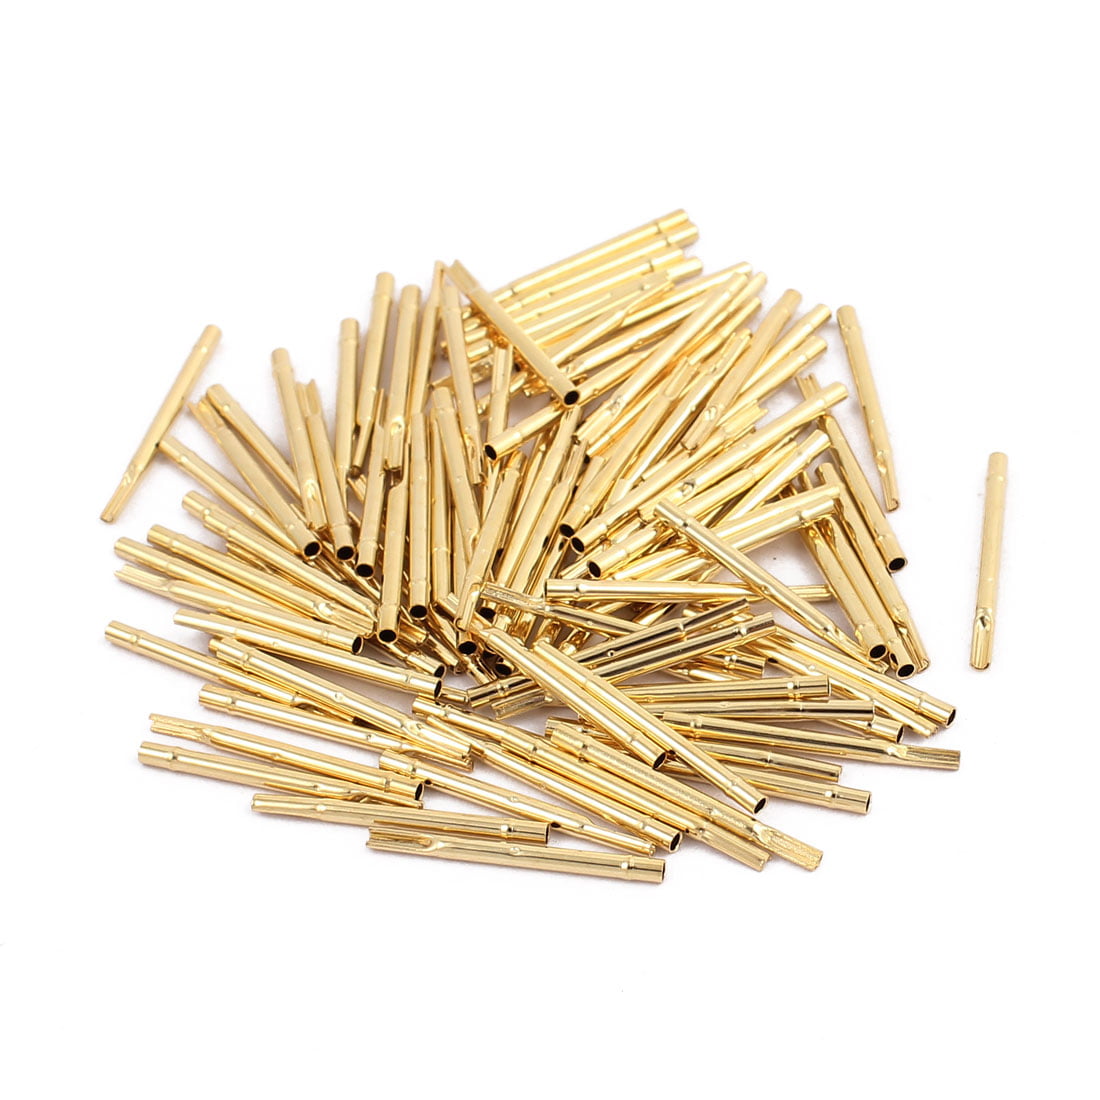 100pcs R75-2S 1.32mm Dia 17.5mm Length Metal Test Probe Needle Cover Gold Plated 